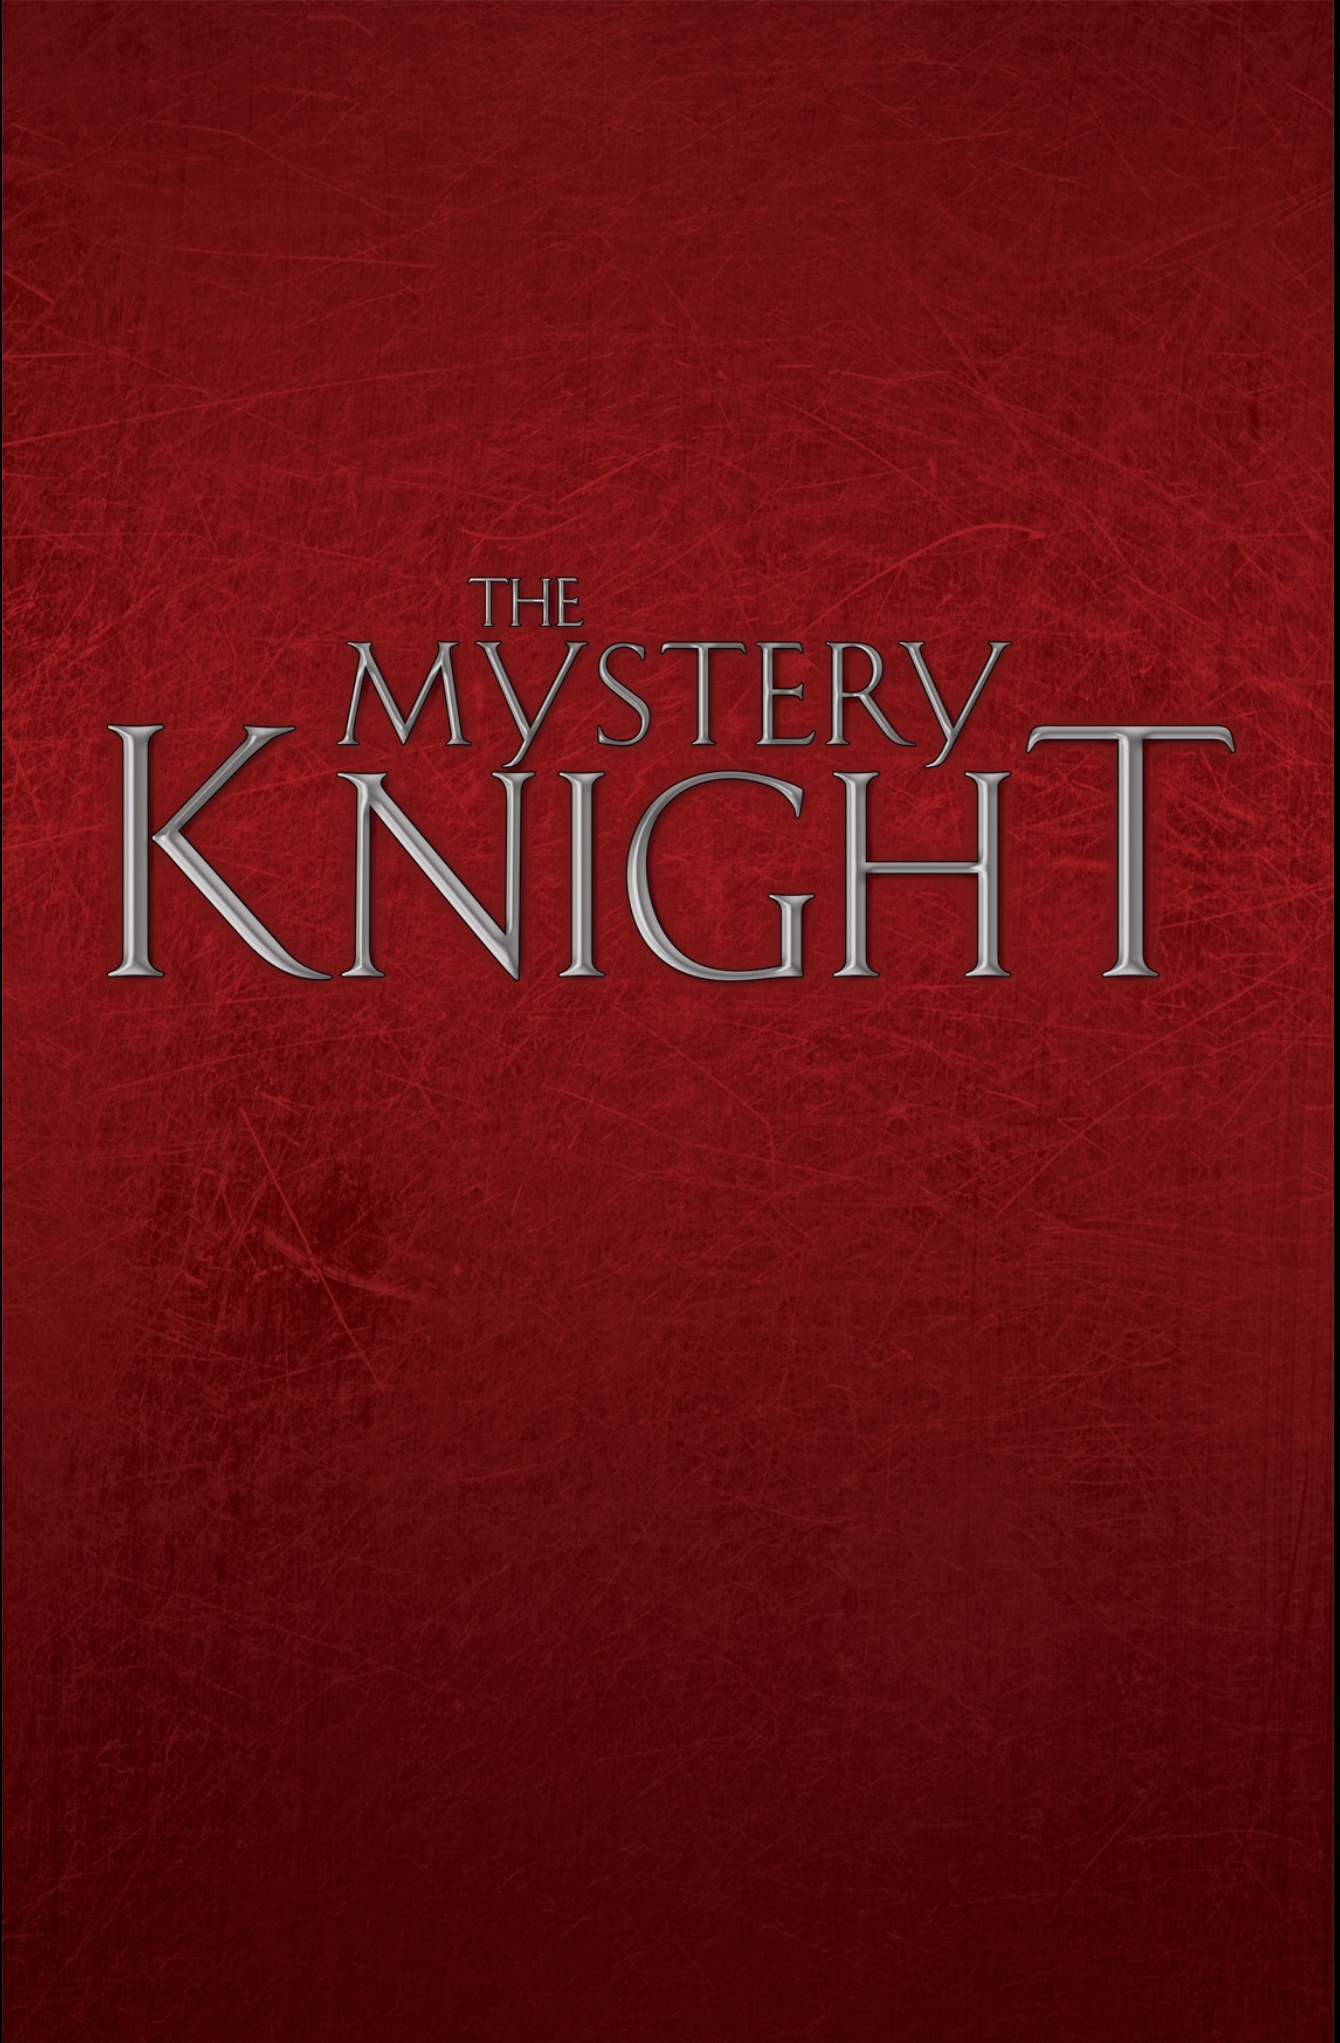 Read online Mystery Knight comic -  Issue # TPB - 5